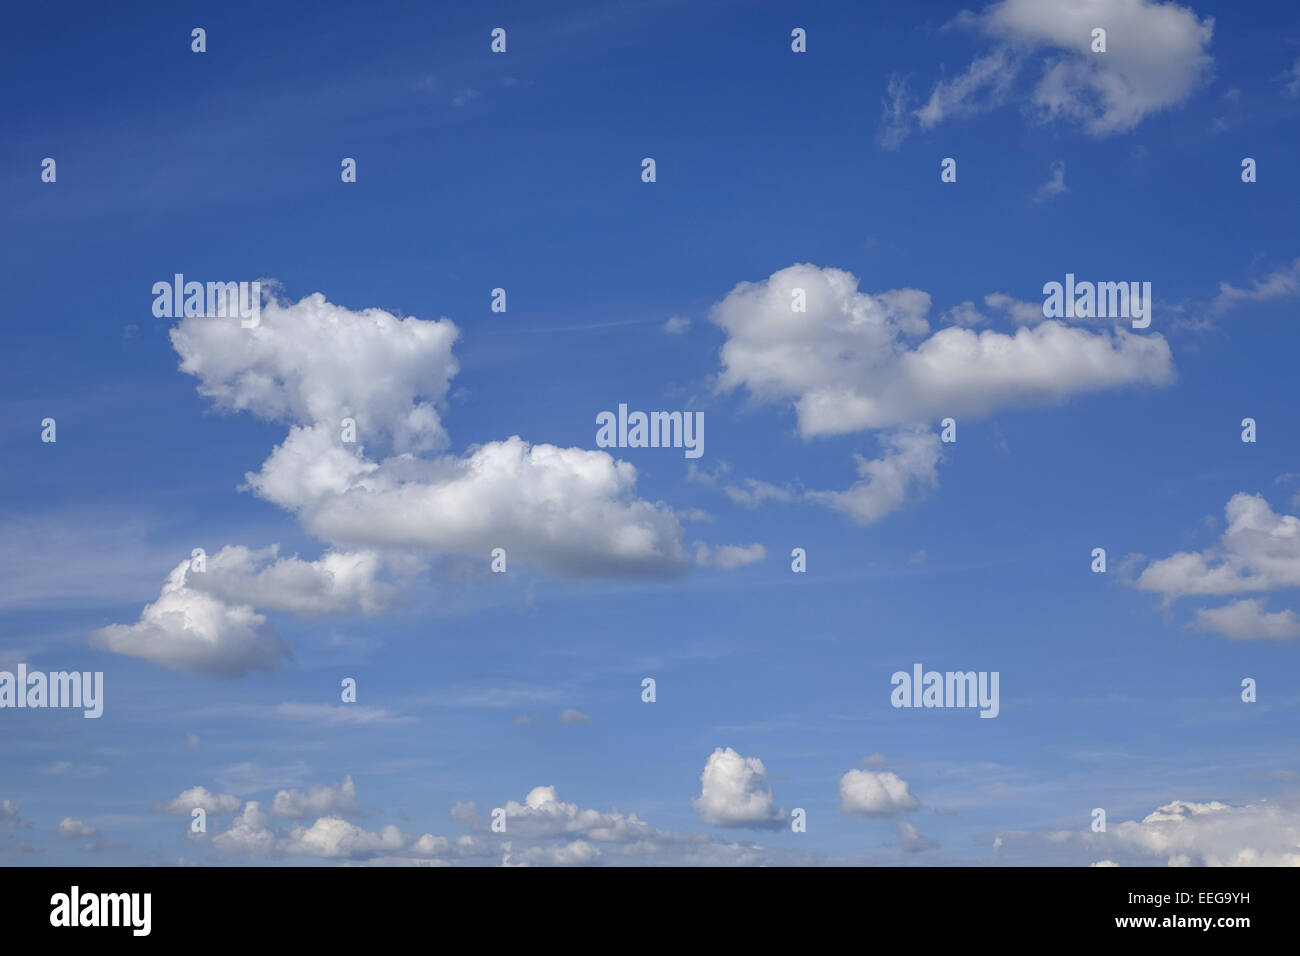 Cumuluswolken am blauen Himmel, Cumulus clouds against a blue sky, .blue and white, Cirrocumulus, cloud, formations, formation, Stock Photo